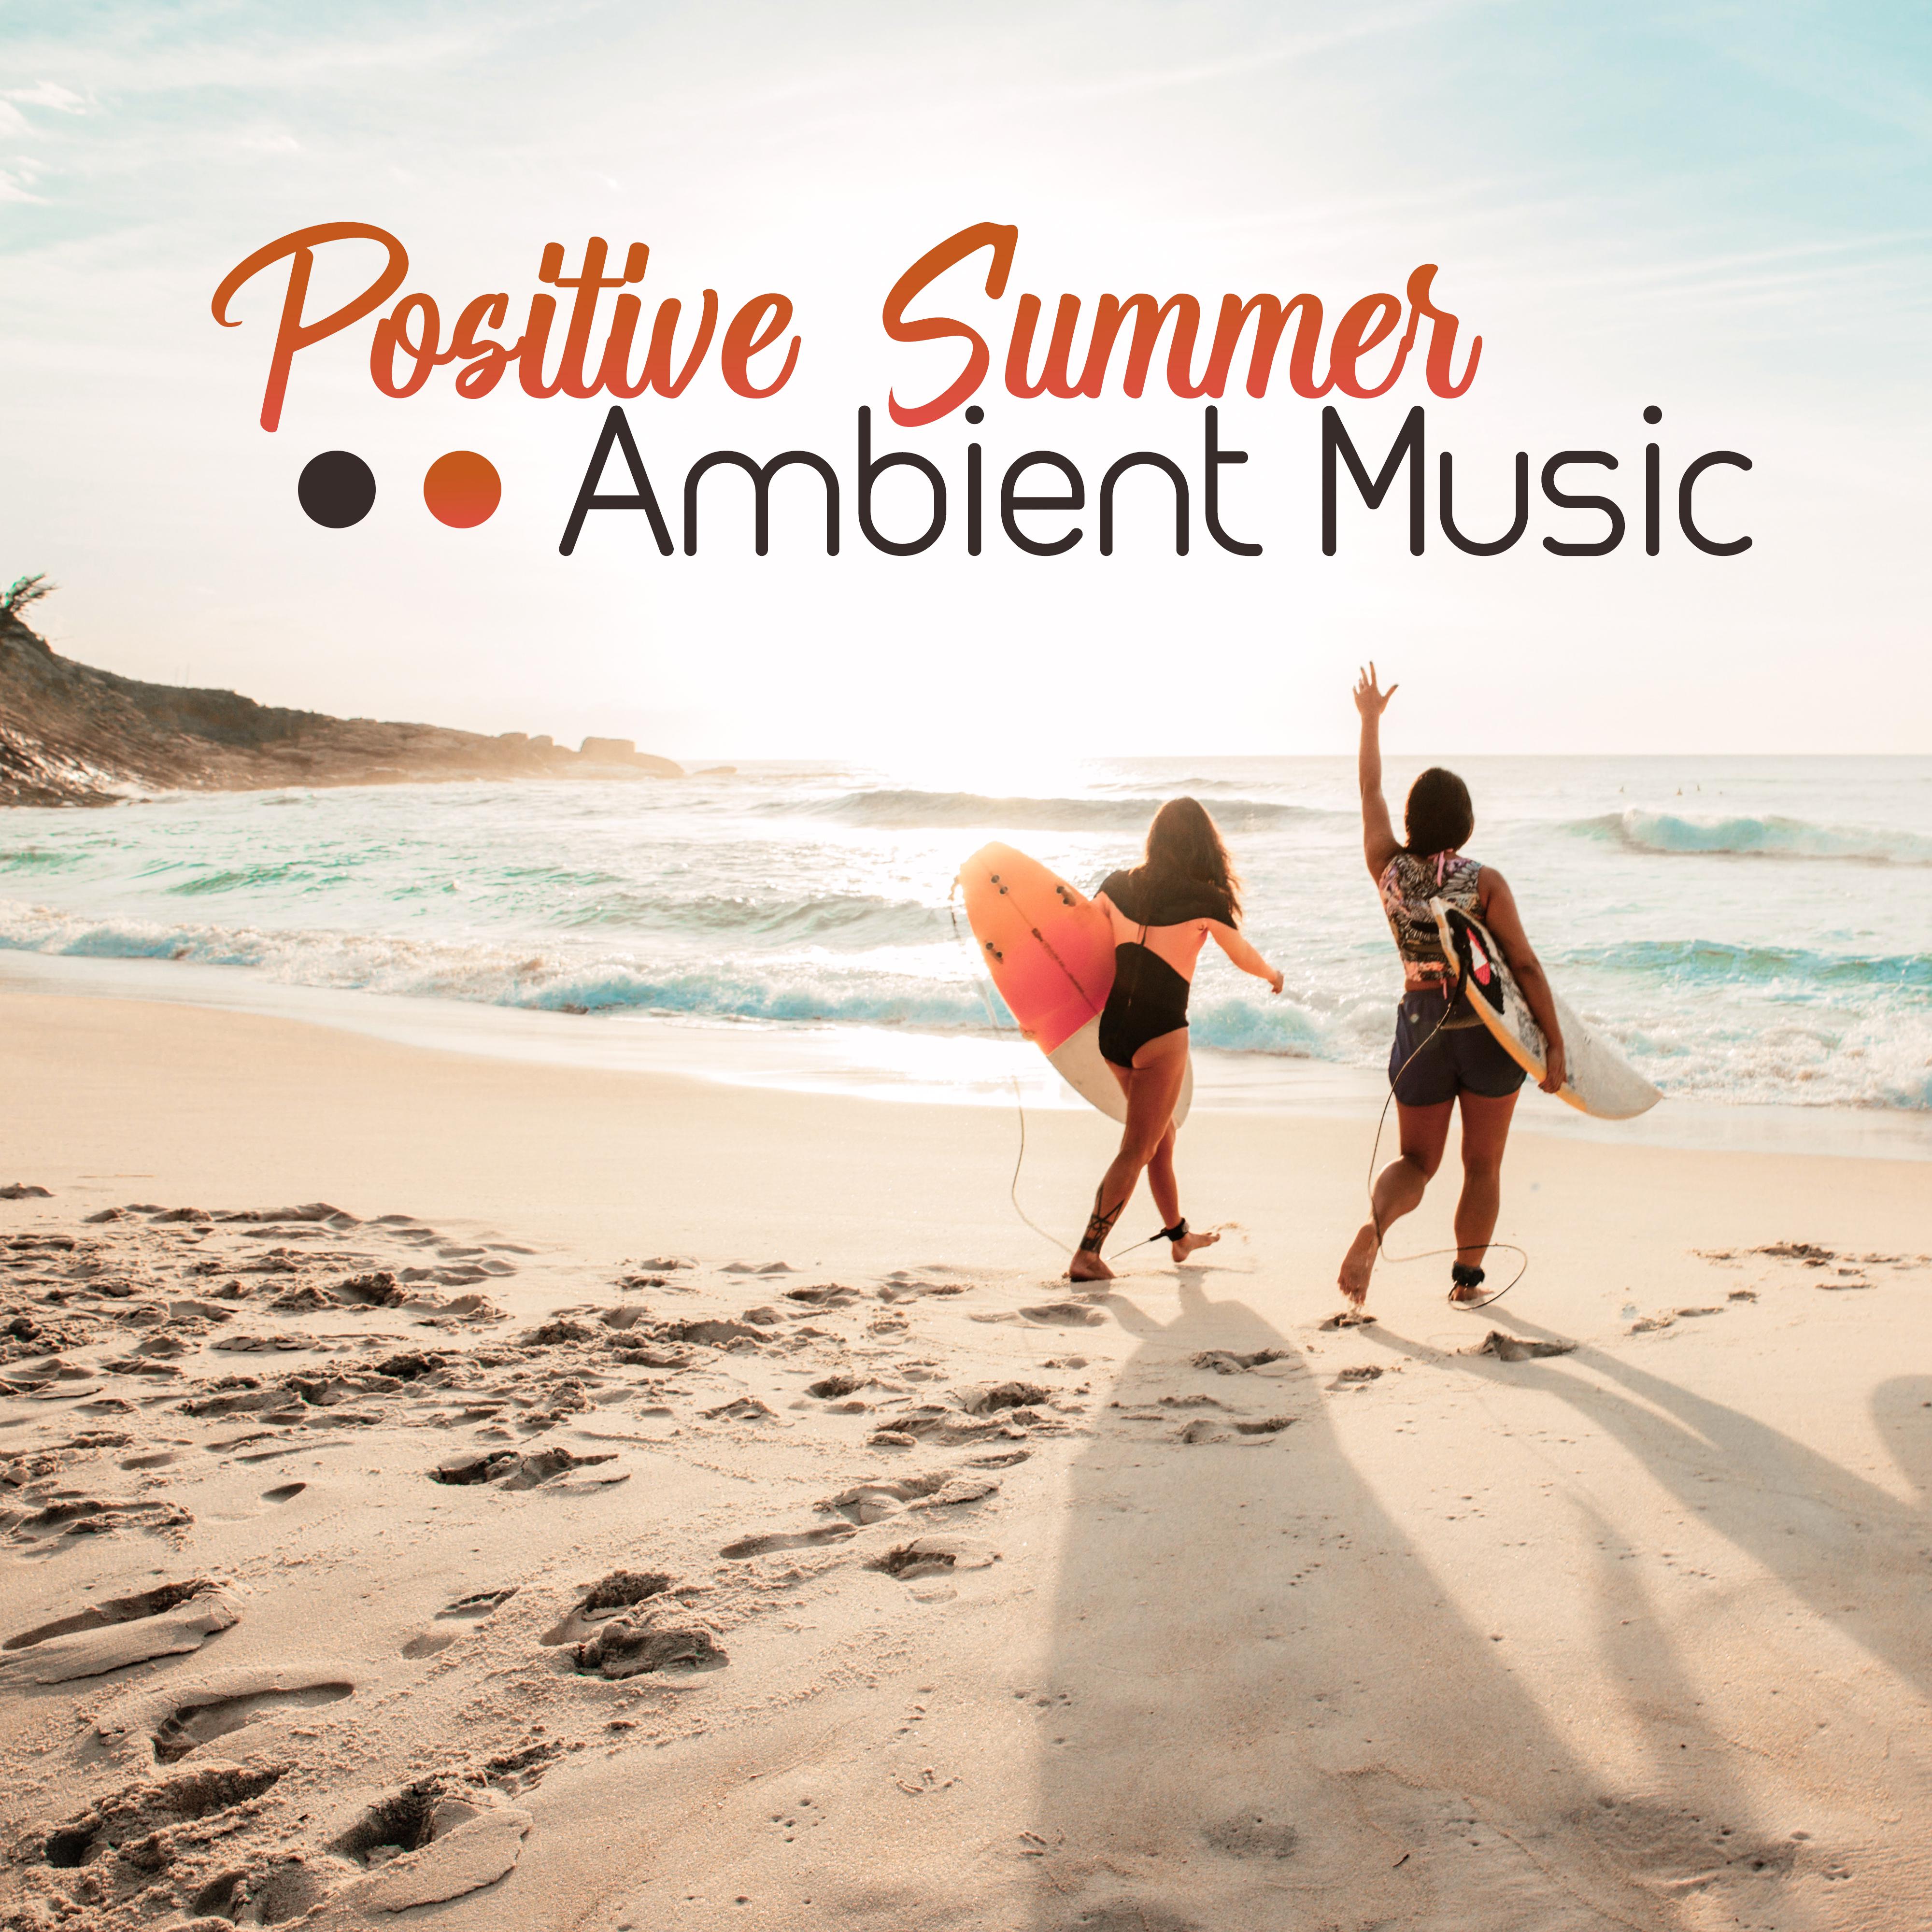 Positive Summer Ambient Music - Relaxing Vibes for a Moment of Respite and Rest